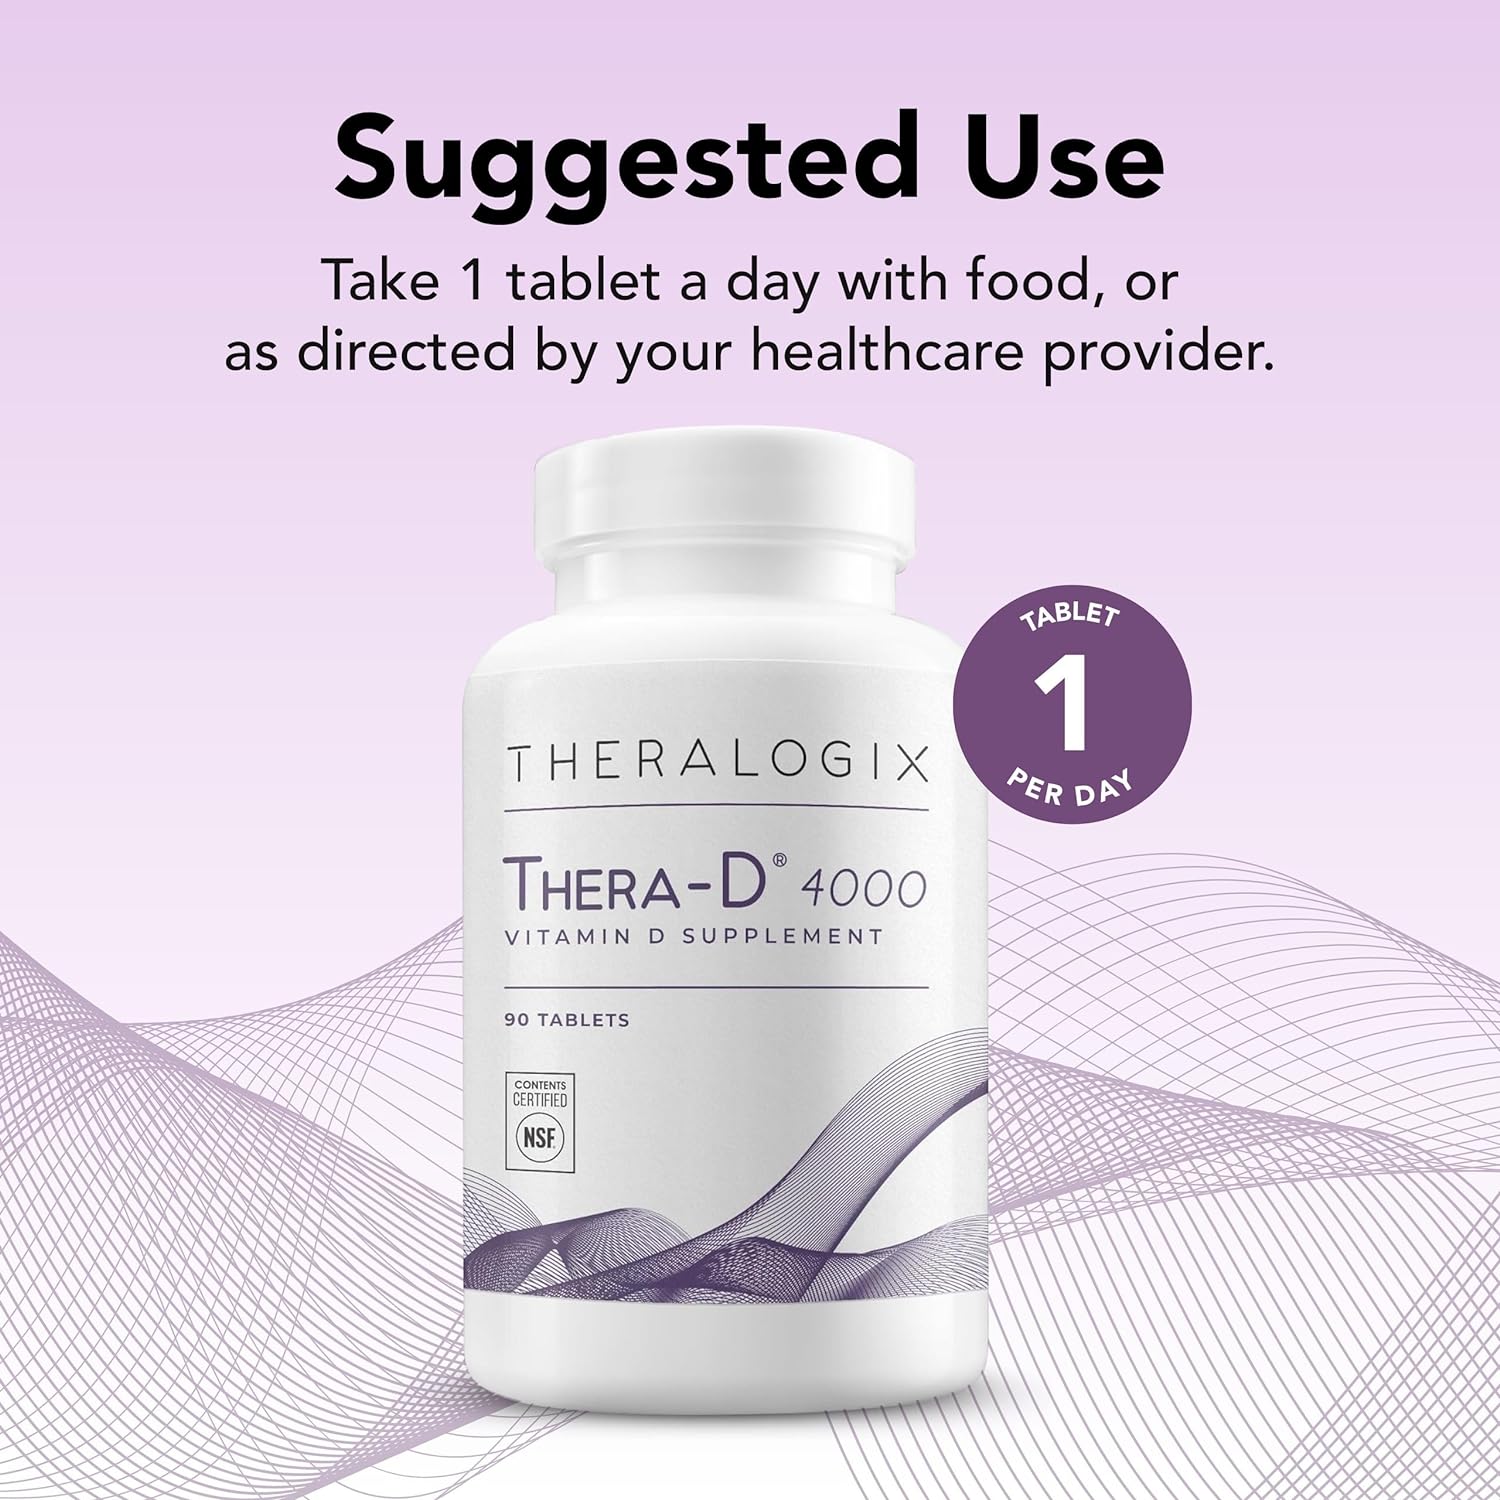 Theralogix Thera-D 4000 Vitamin D Supplement - 4,000 IU (100 mcg) Vitamin D3 Tablets - 90-Day Supply - Immune Support Supplement for Women & Men - Aids Bone & Heart Health - NSF Certified - 90 Tablets : Health & Household